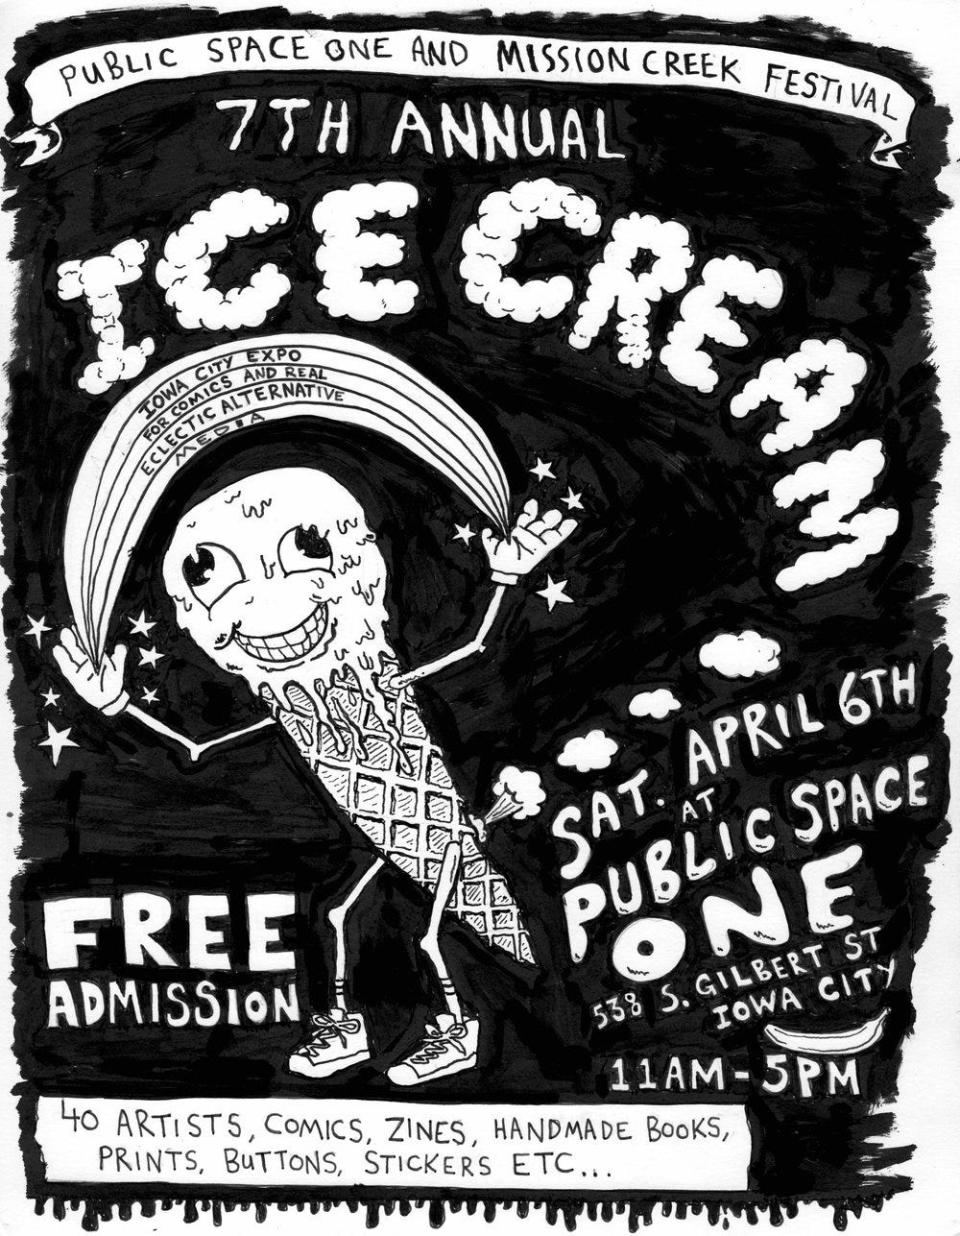 This free event at Public Space One, from 11 a.m. to 5 p.m. on Saturday, April 6 highlights the work of local cartoonists, zinesters, and art books/handmade book artists.